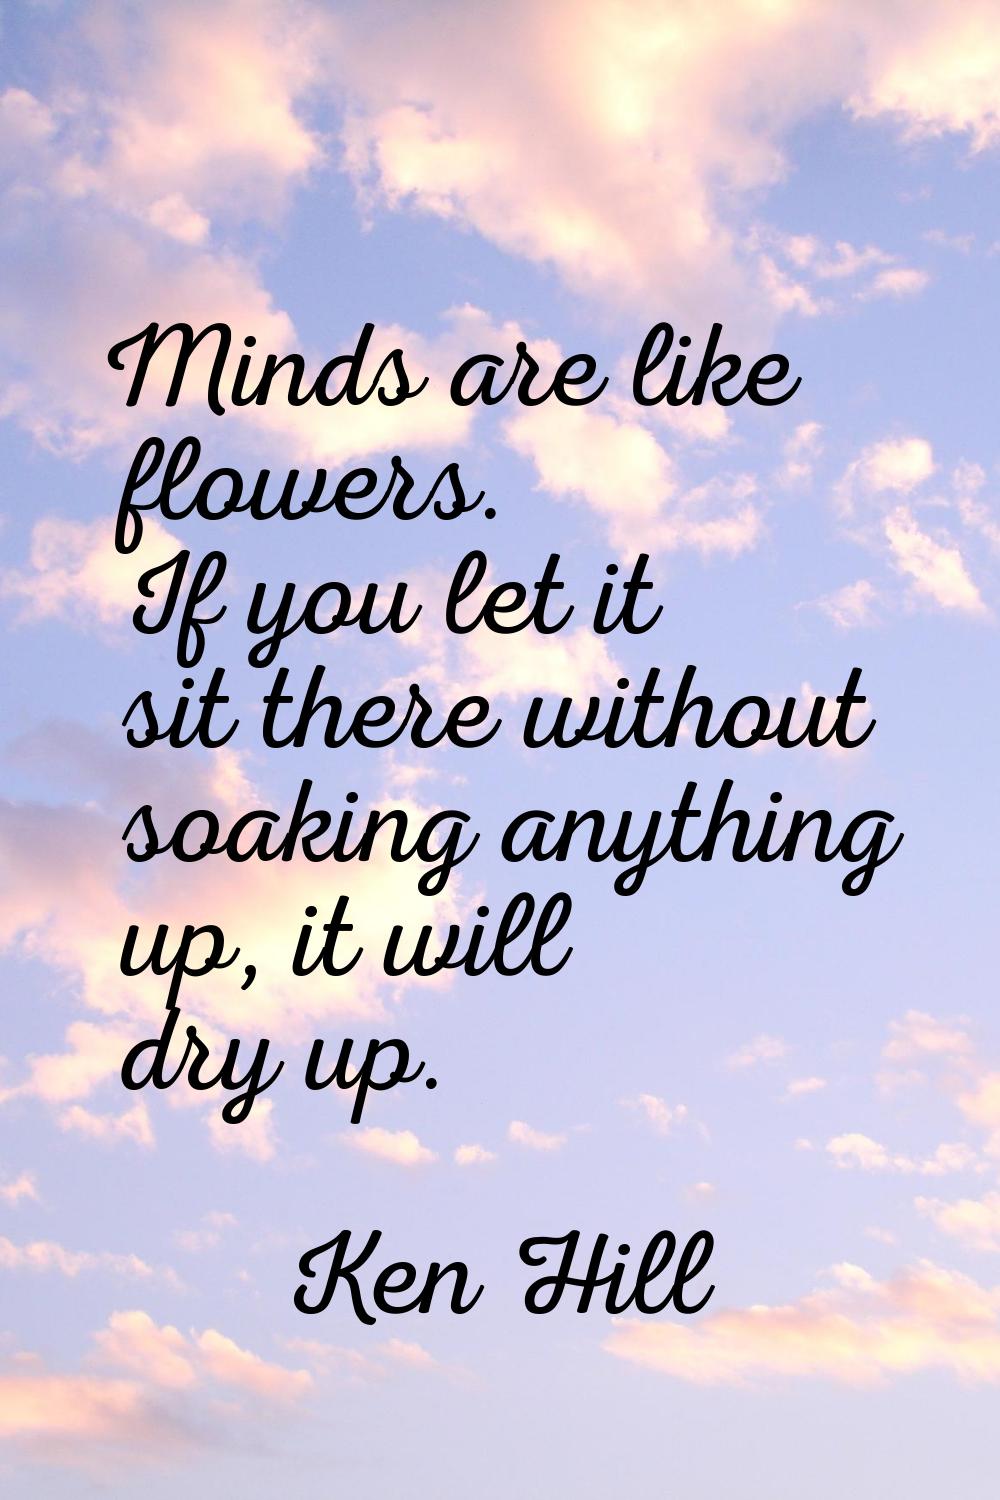 Minds are like flowers. If you let it sit there without soaking anything up, it will dry up.